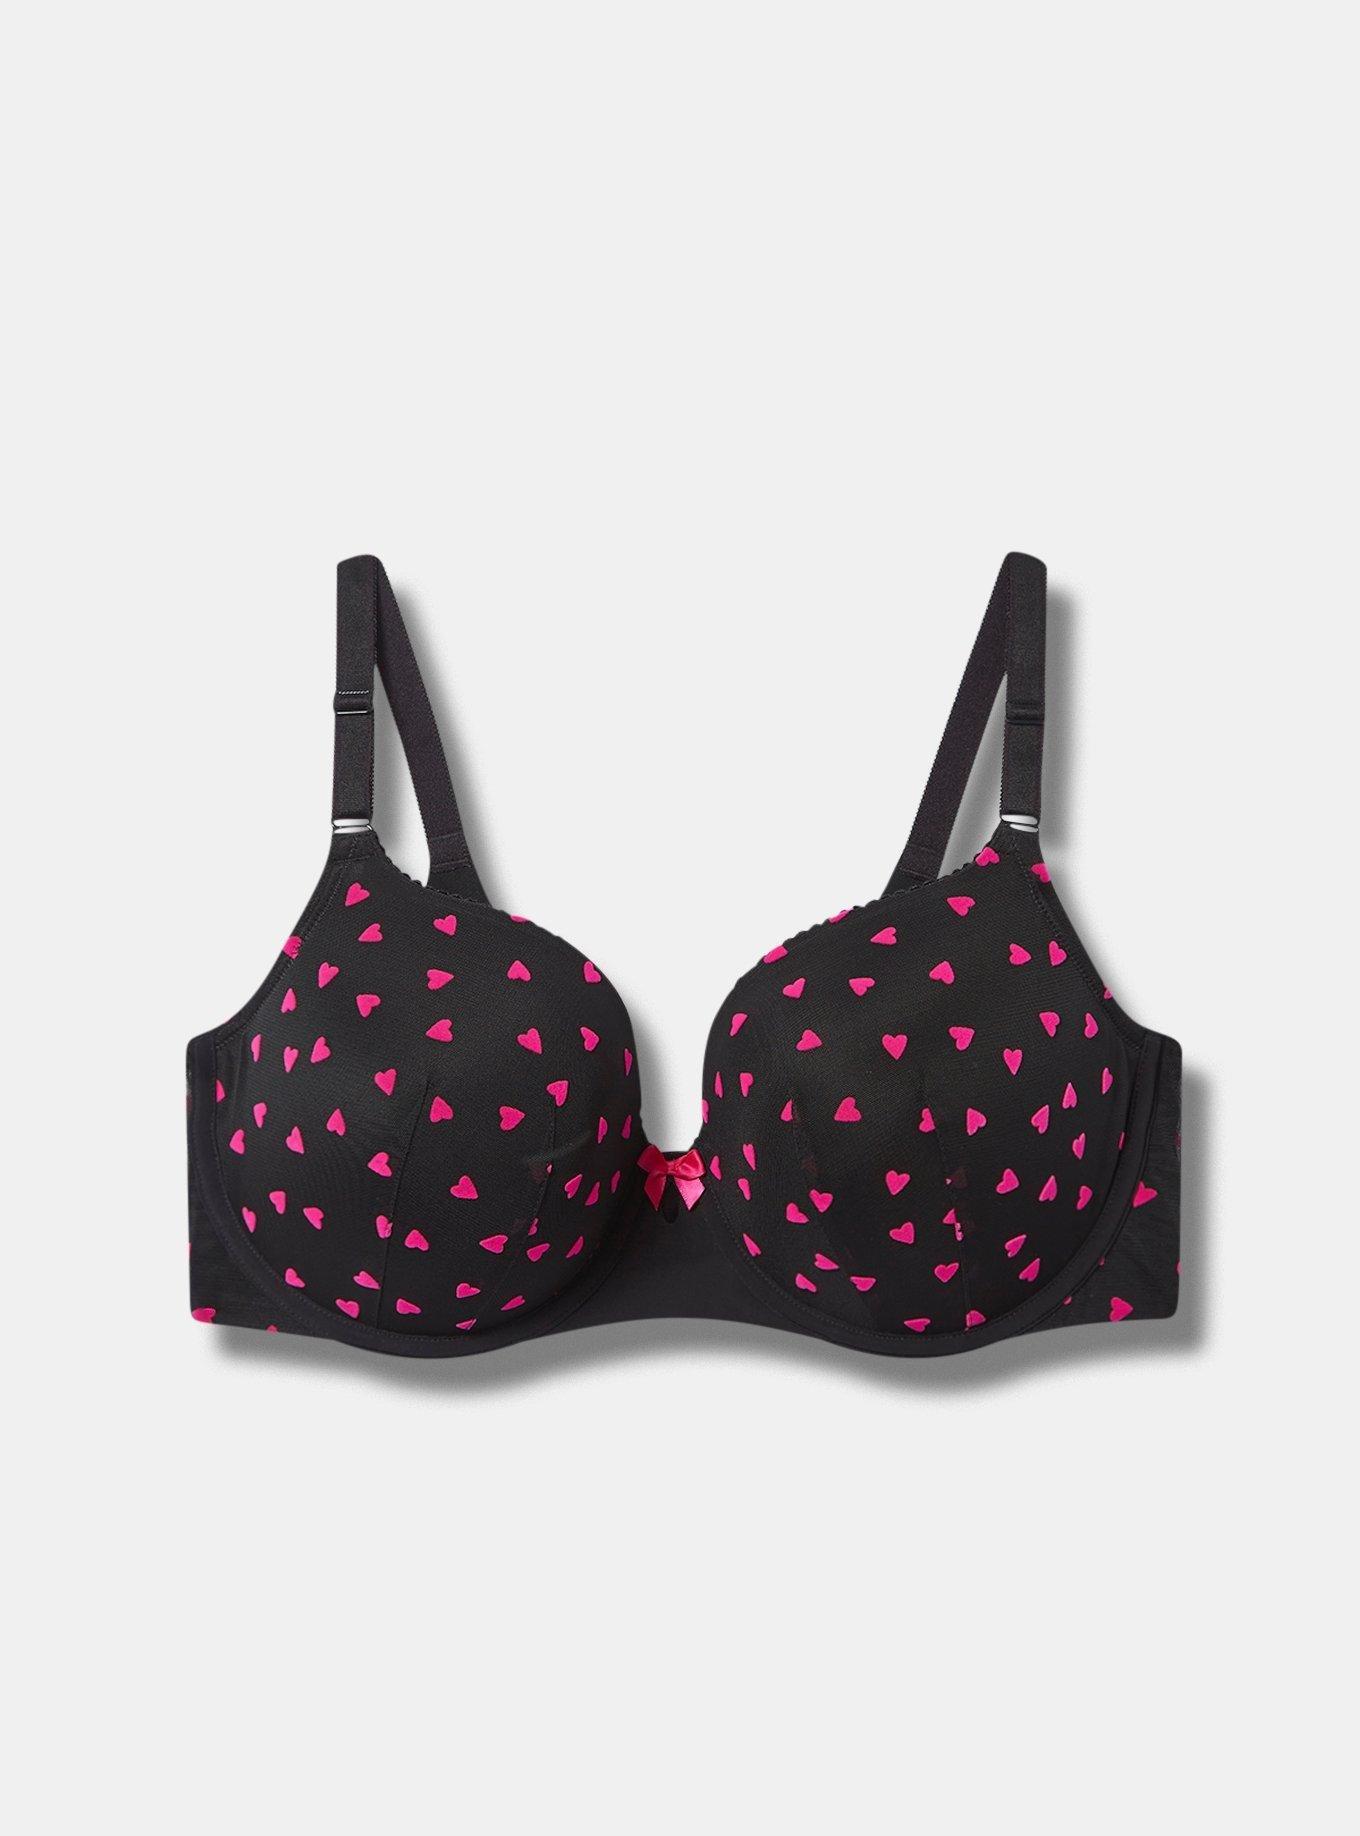 44DD-Sized Shoppers Call This the “Perfect T-Shirt” Bra” and It's